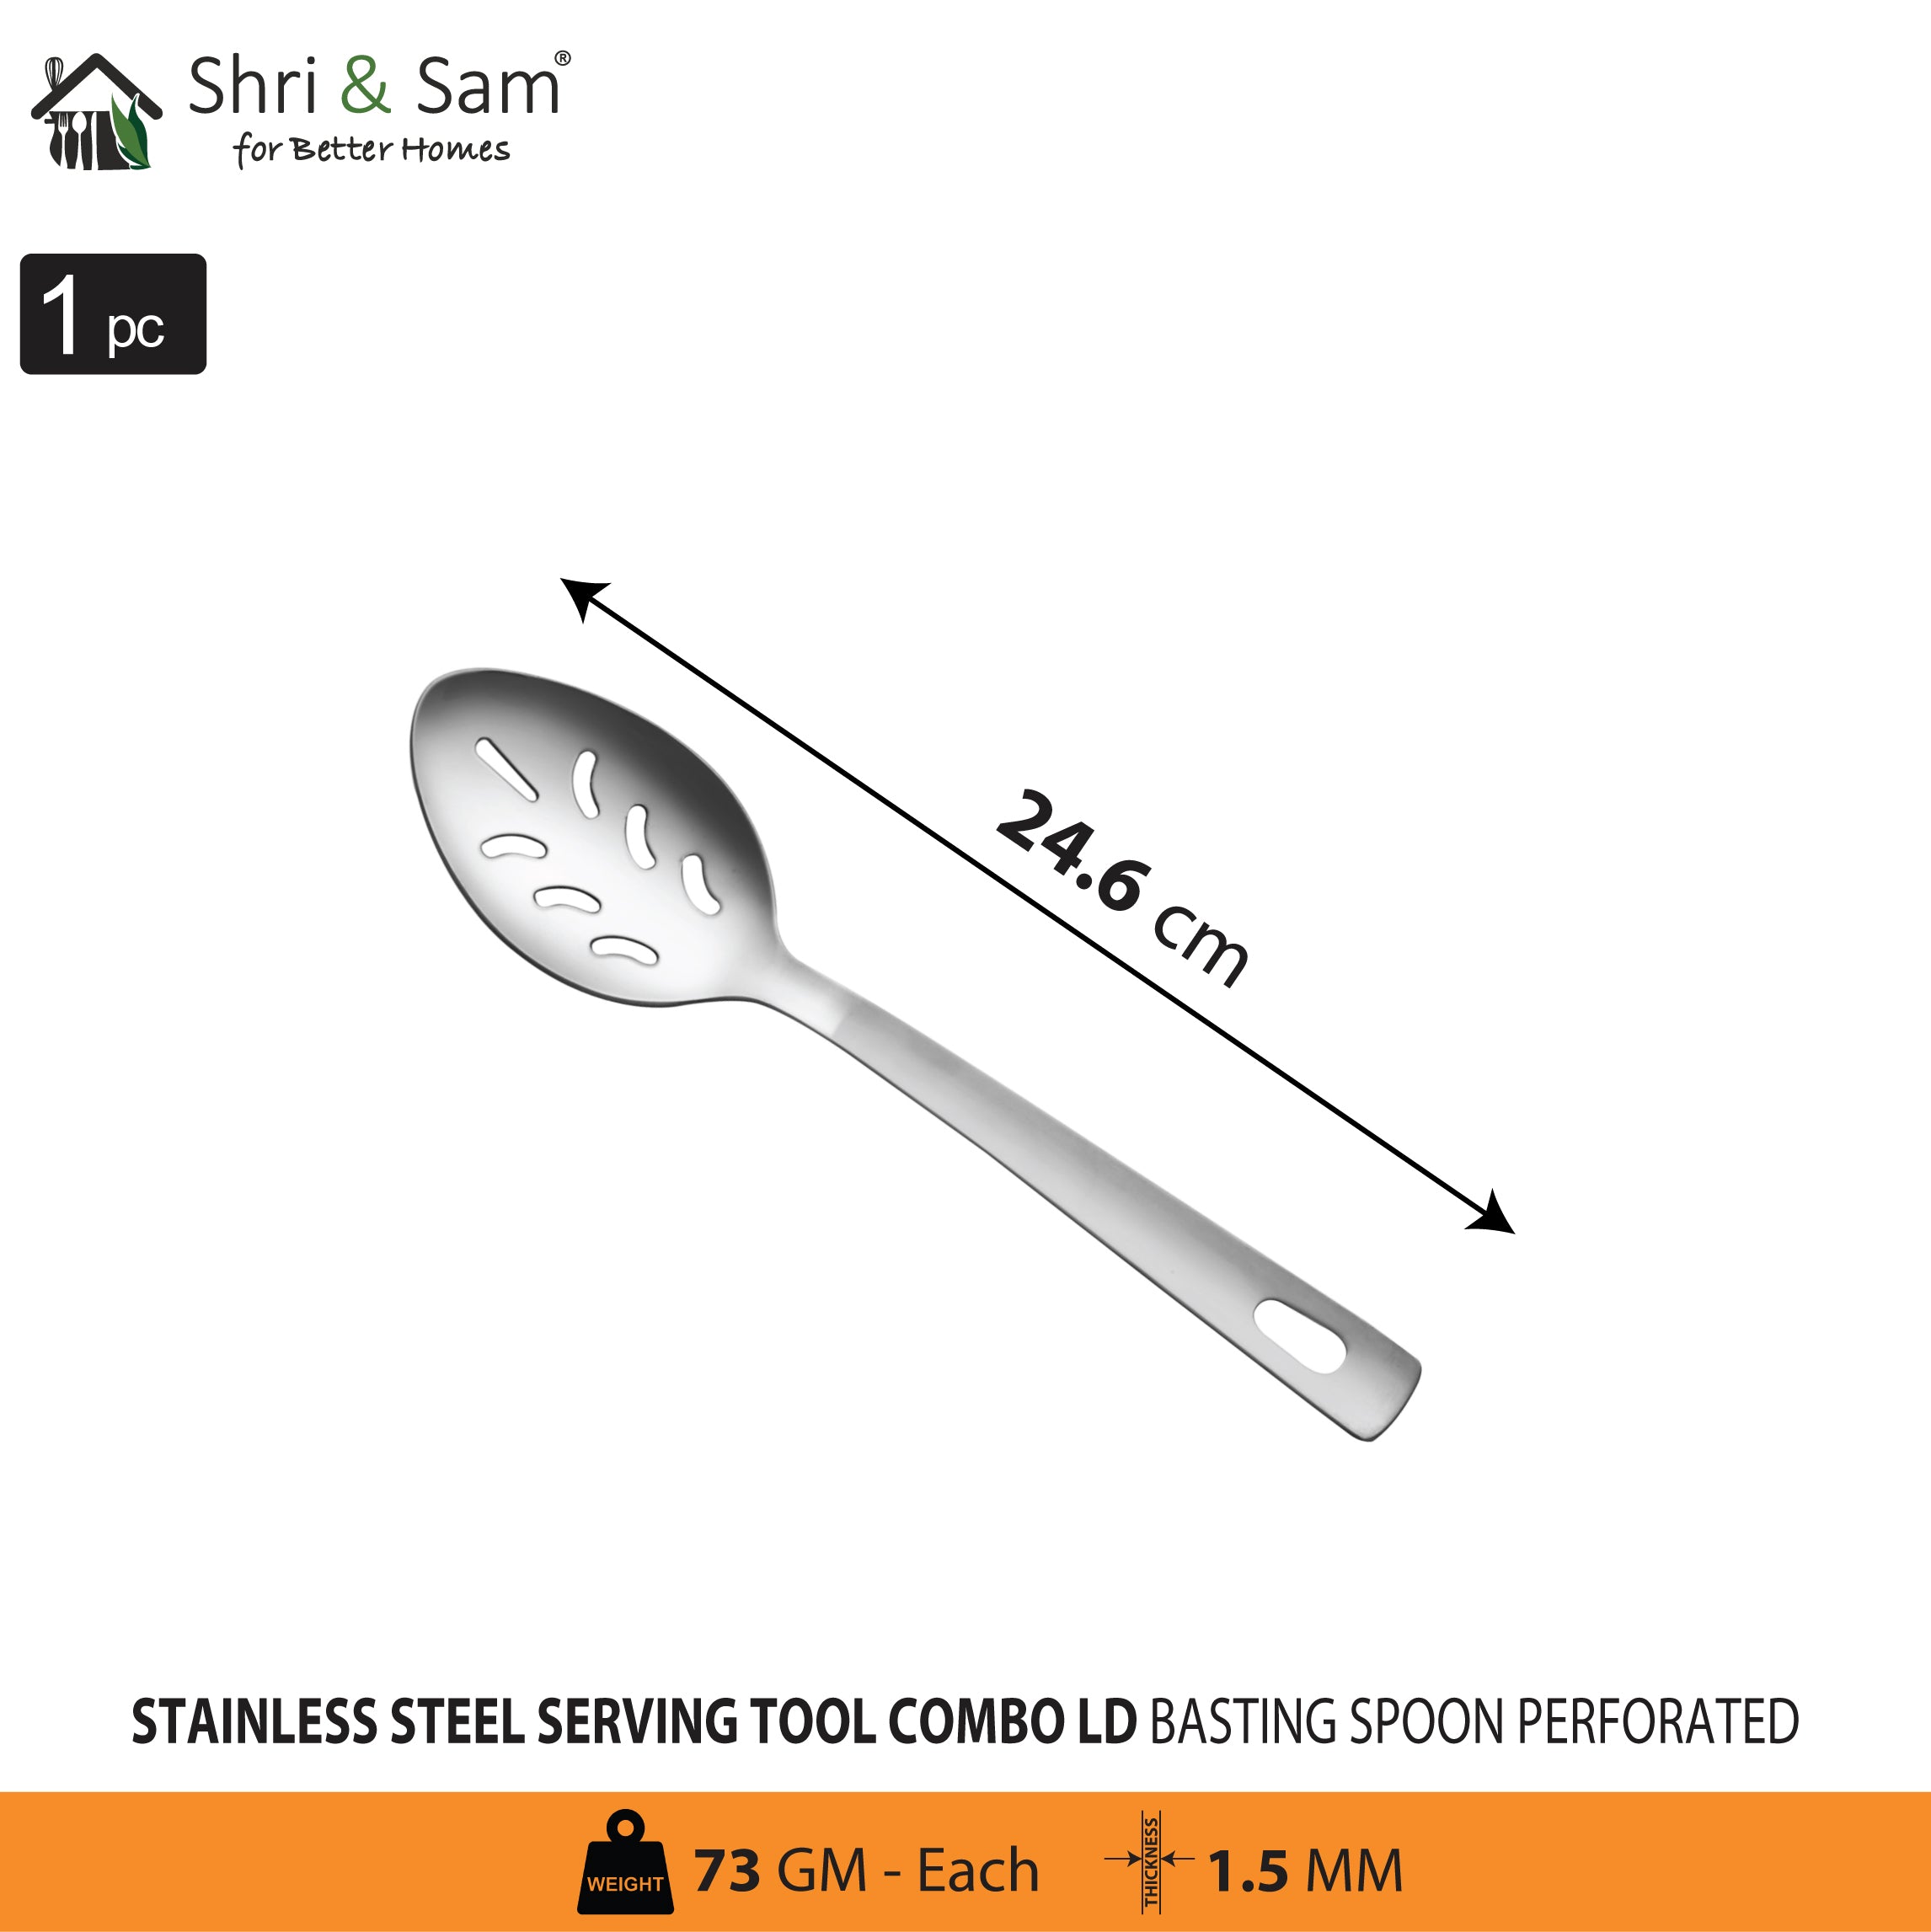 Stainless Steel Serving Tool Combo LD